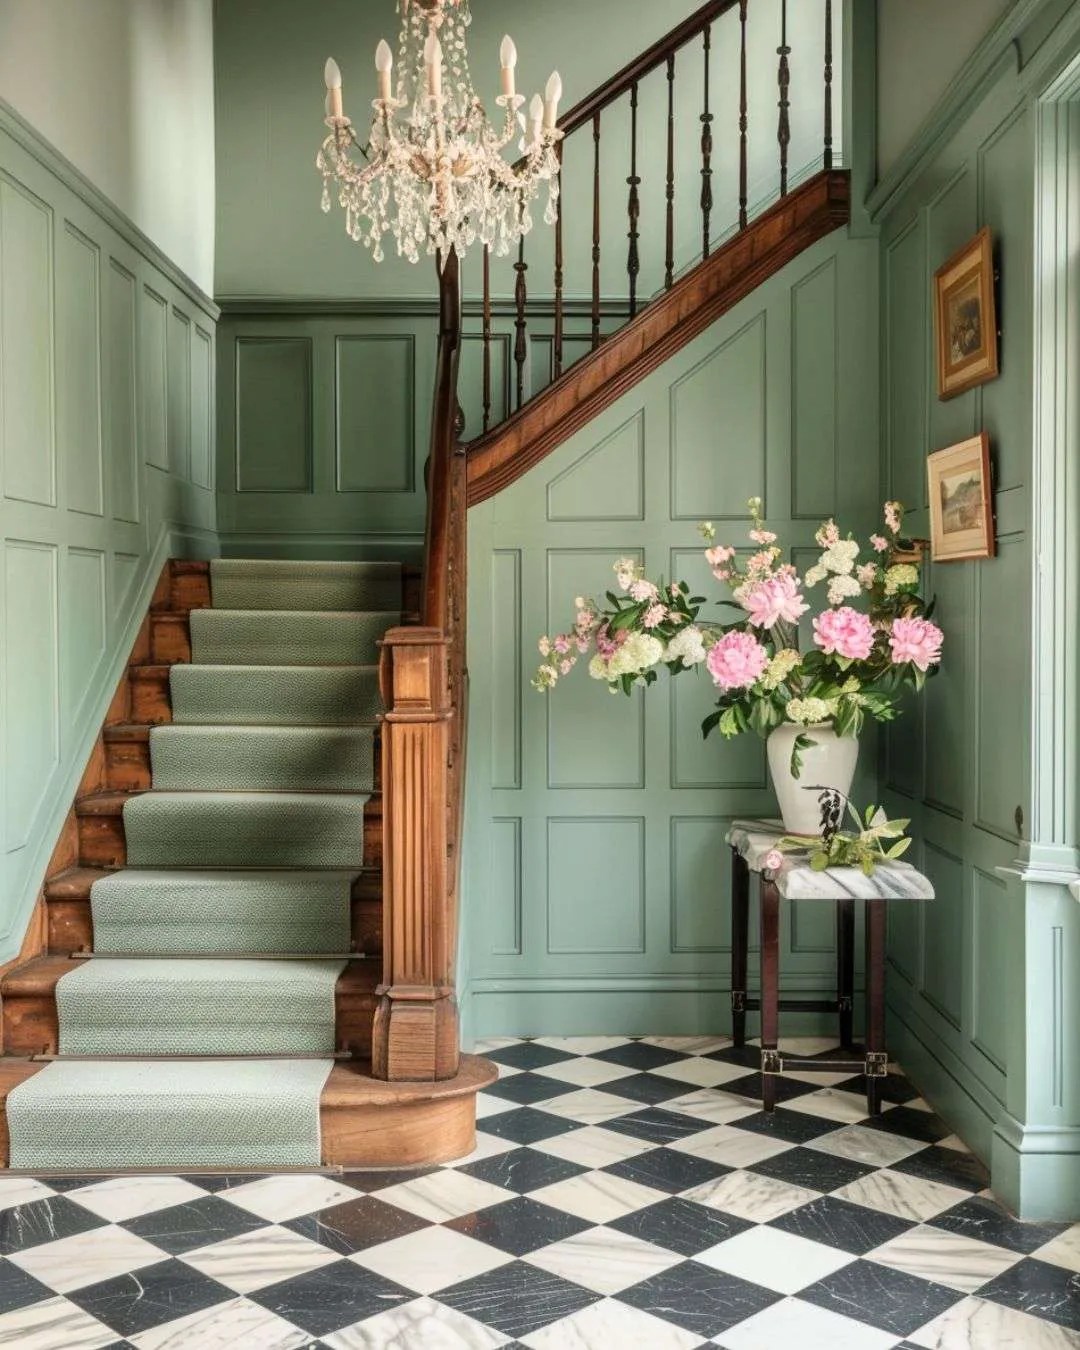 a sage green hallway with checked black and white flooring and a large vase of flowers